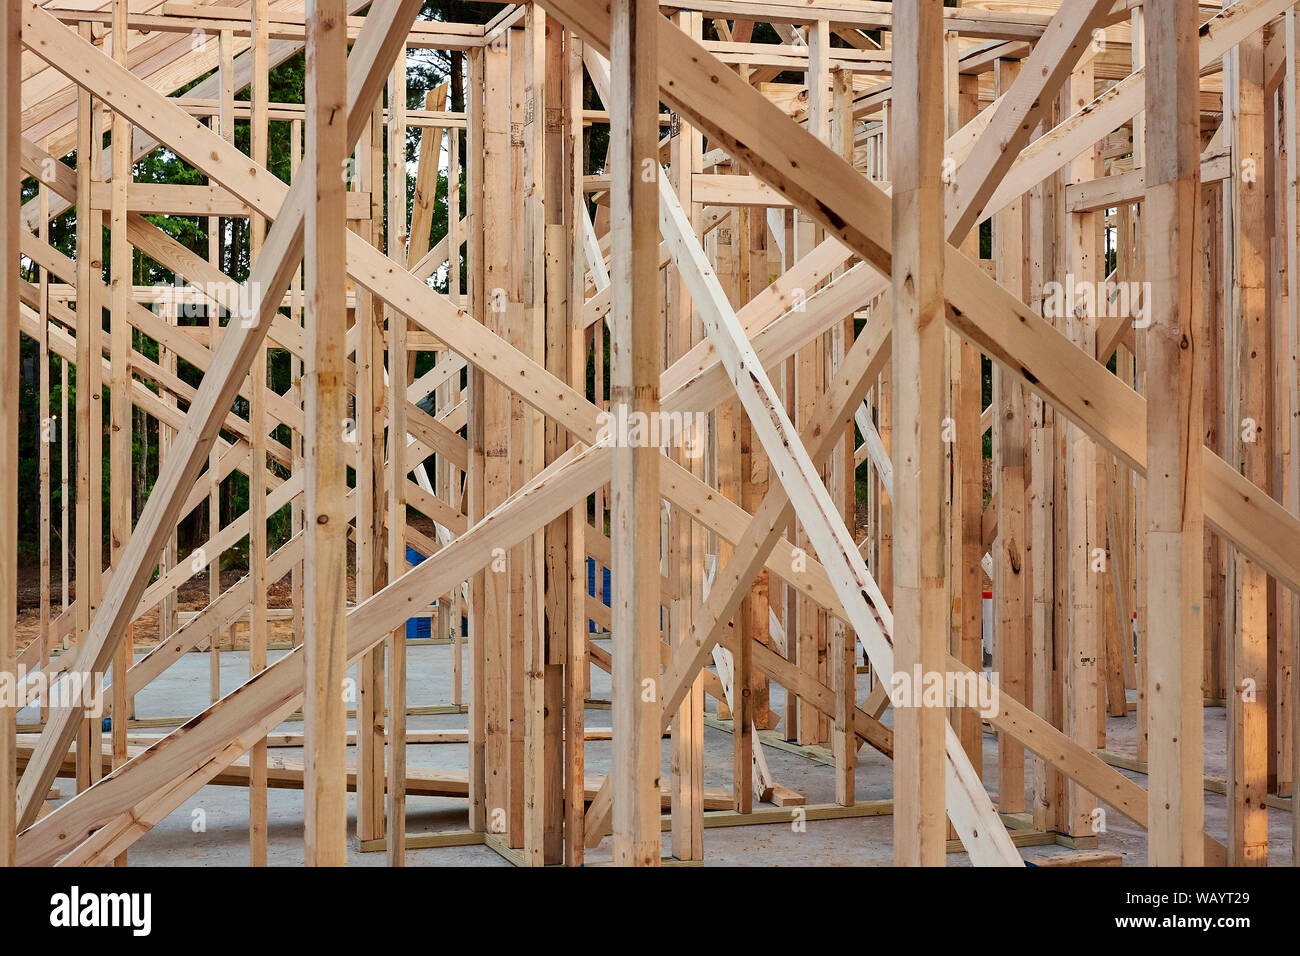 New home or house under construction with wood framing in Alabama, USA. Stock Photo